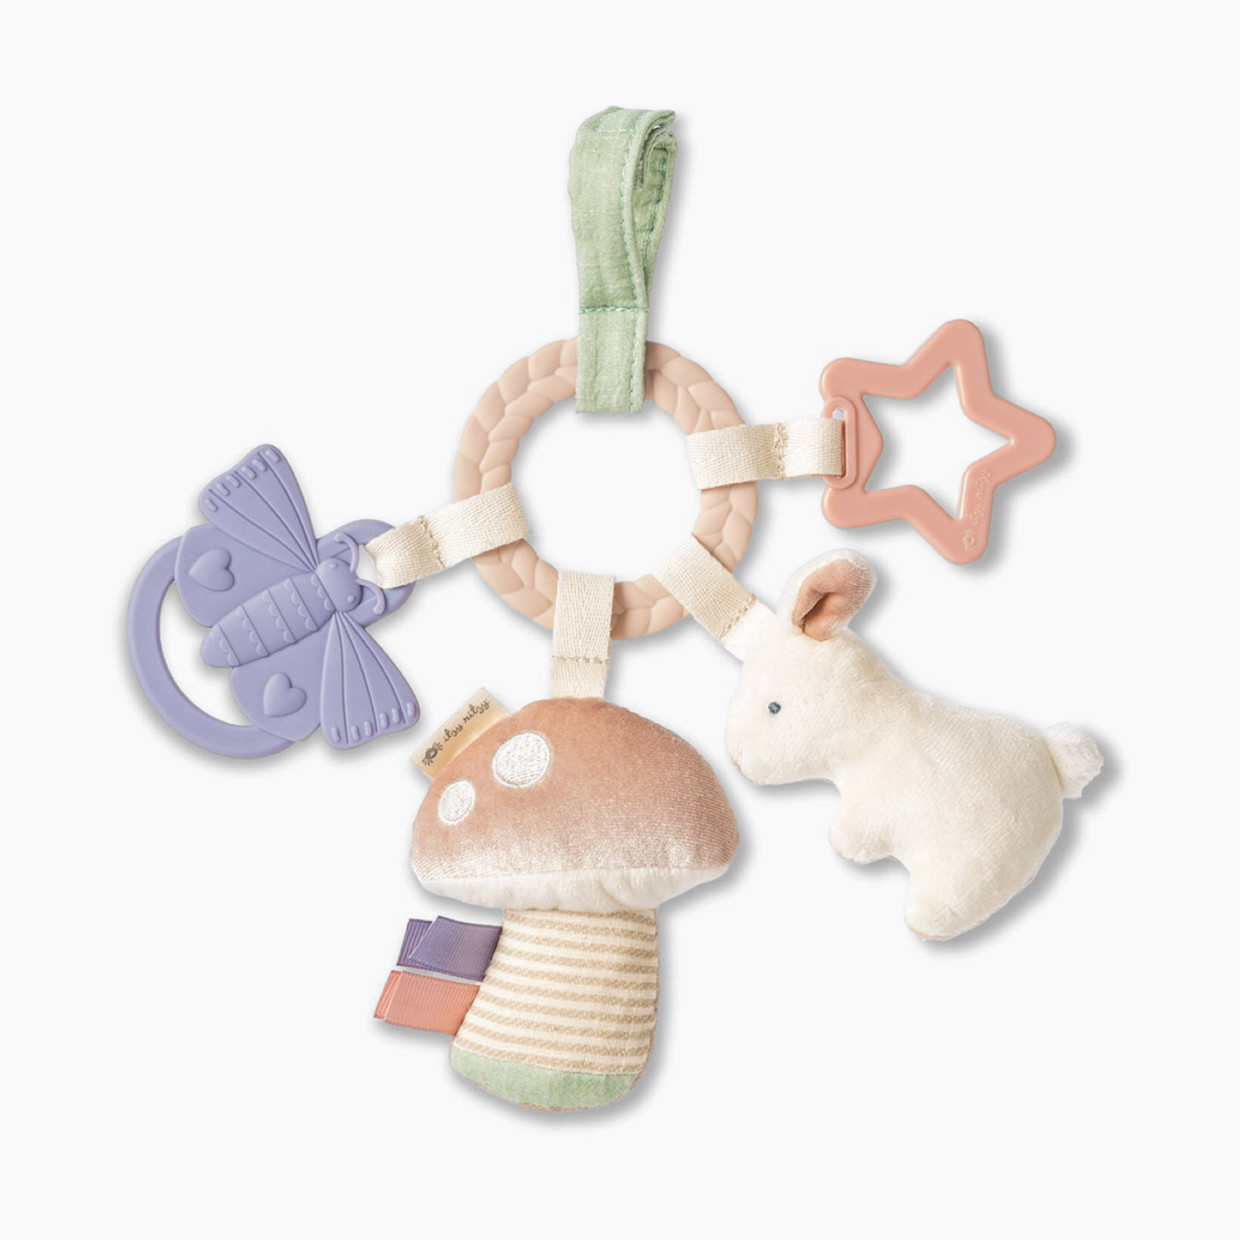 Itzy Ritzy Bitzy Busy Ring Teething Activity Toy - Bunny.